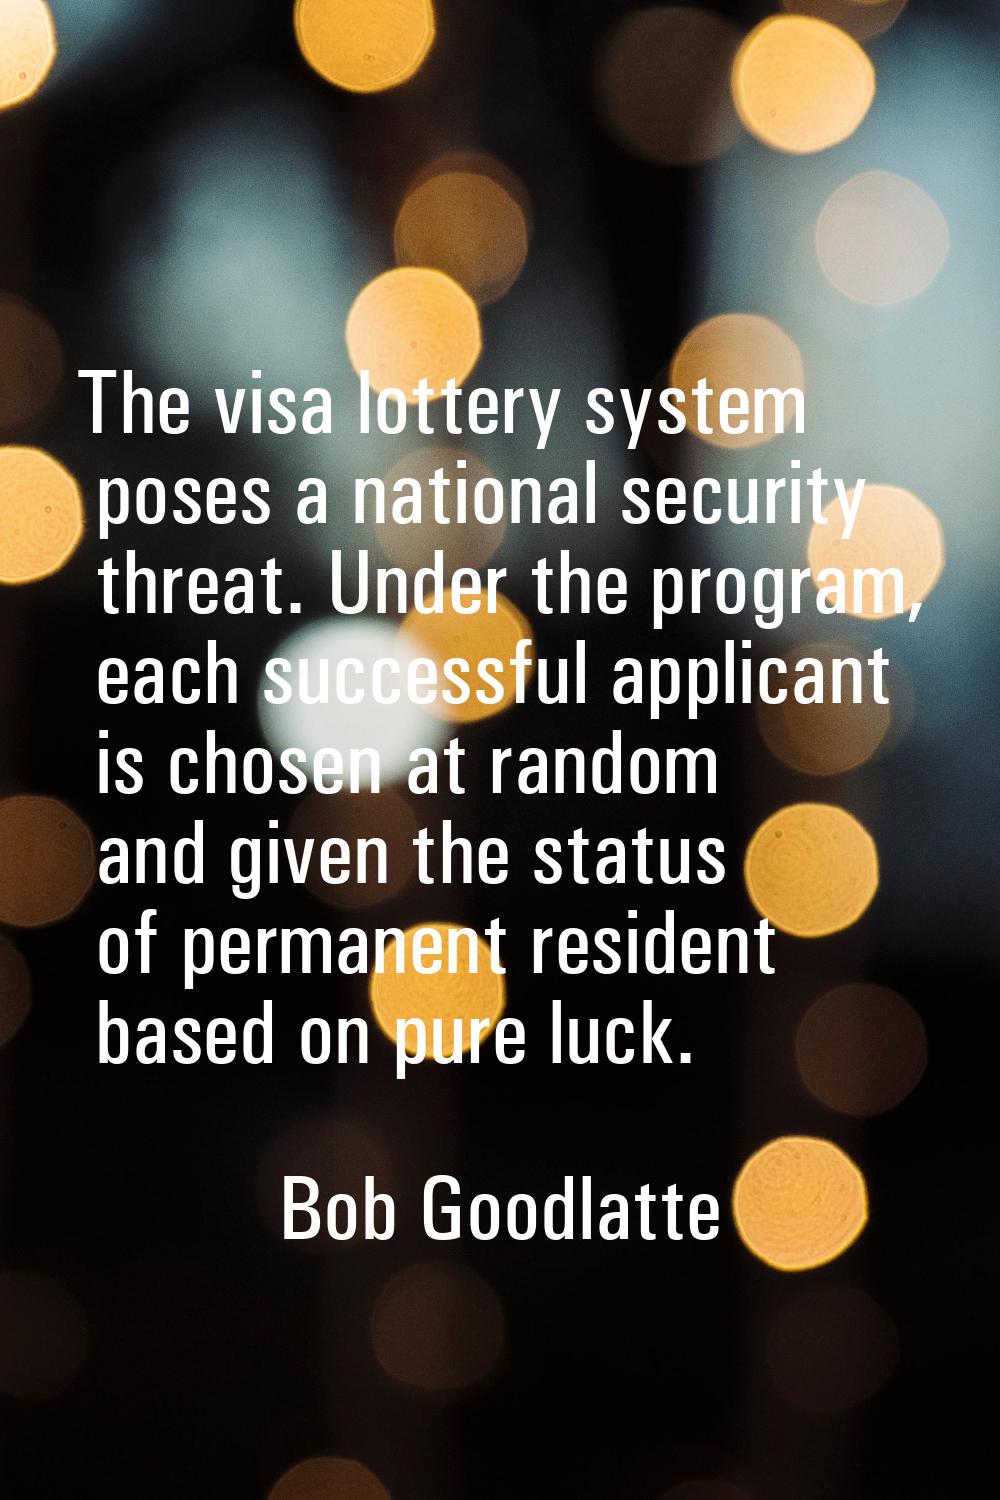 The visa lottery system poses a national security threat. Under the program, each successful applic